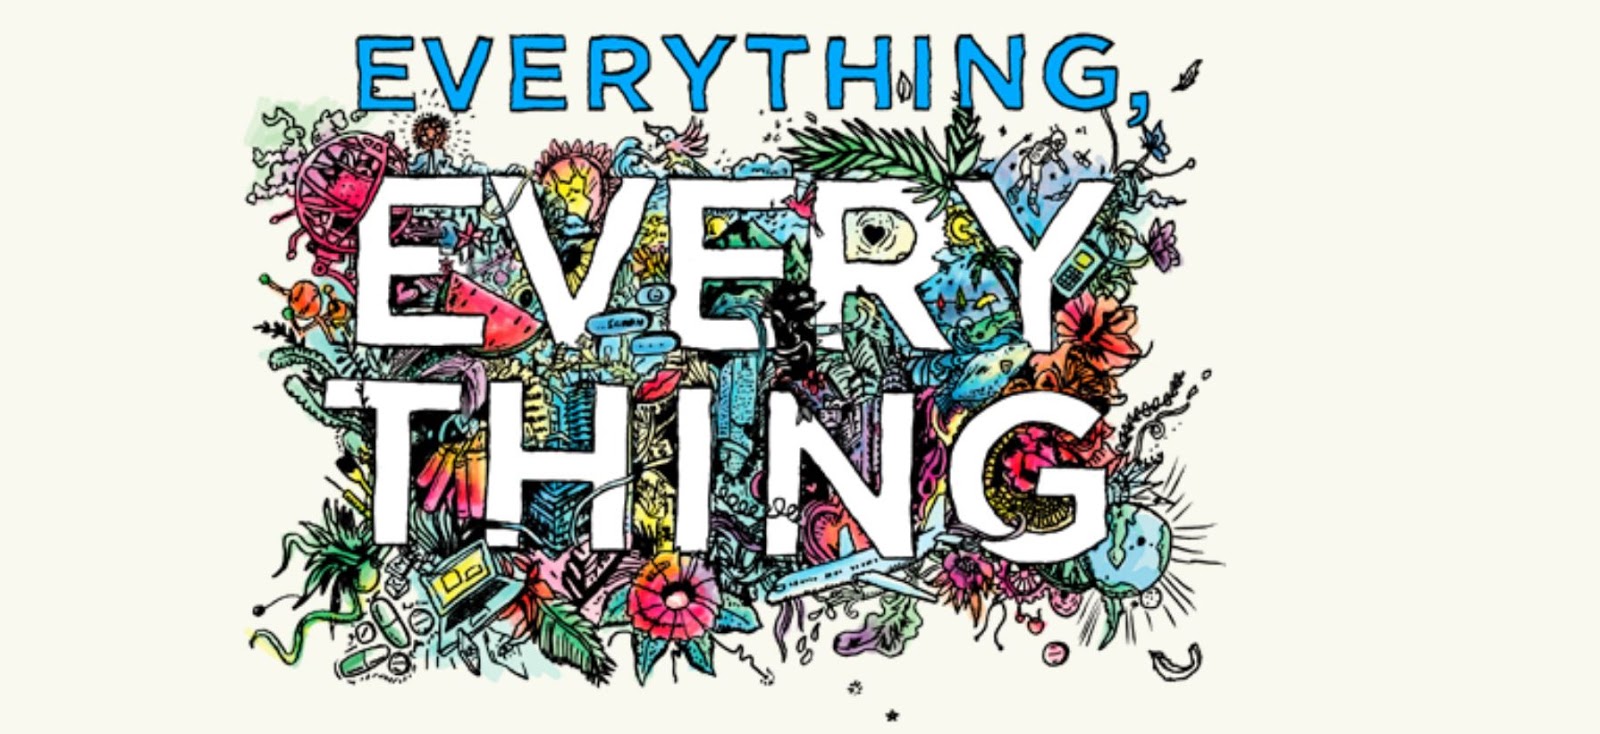 Everything for us. Everything. Everything игра. Иконка everything. Everything about everything.